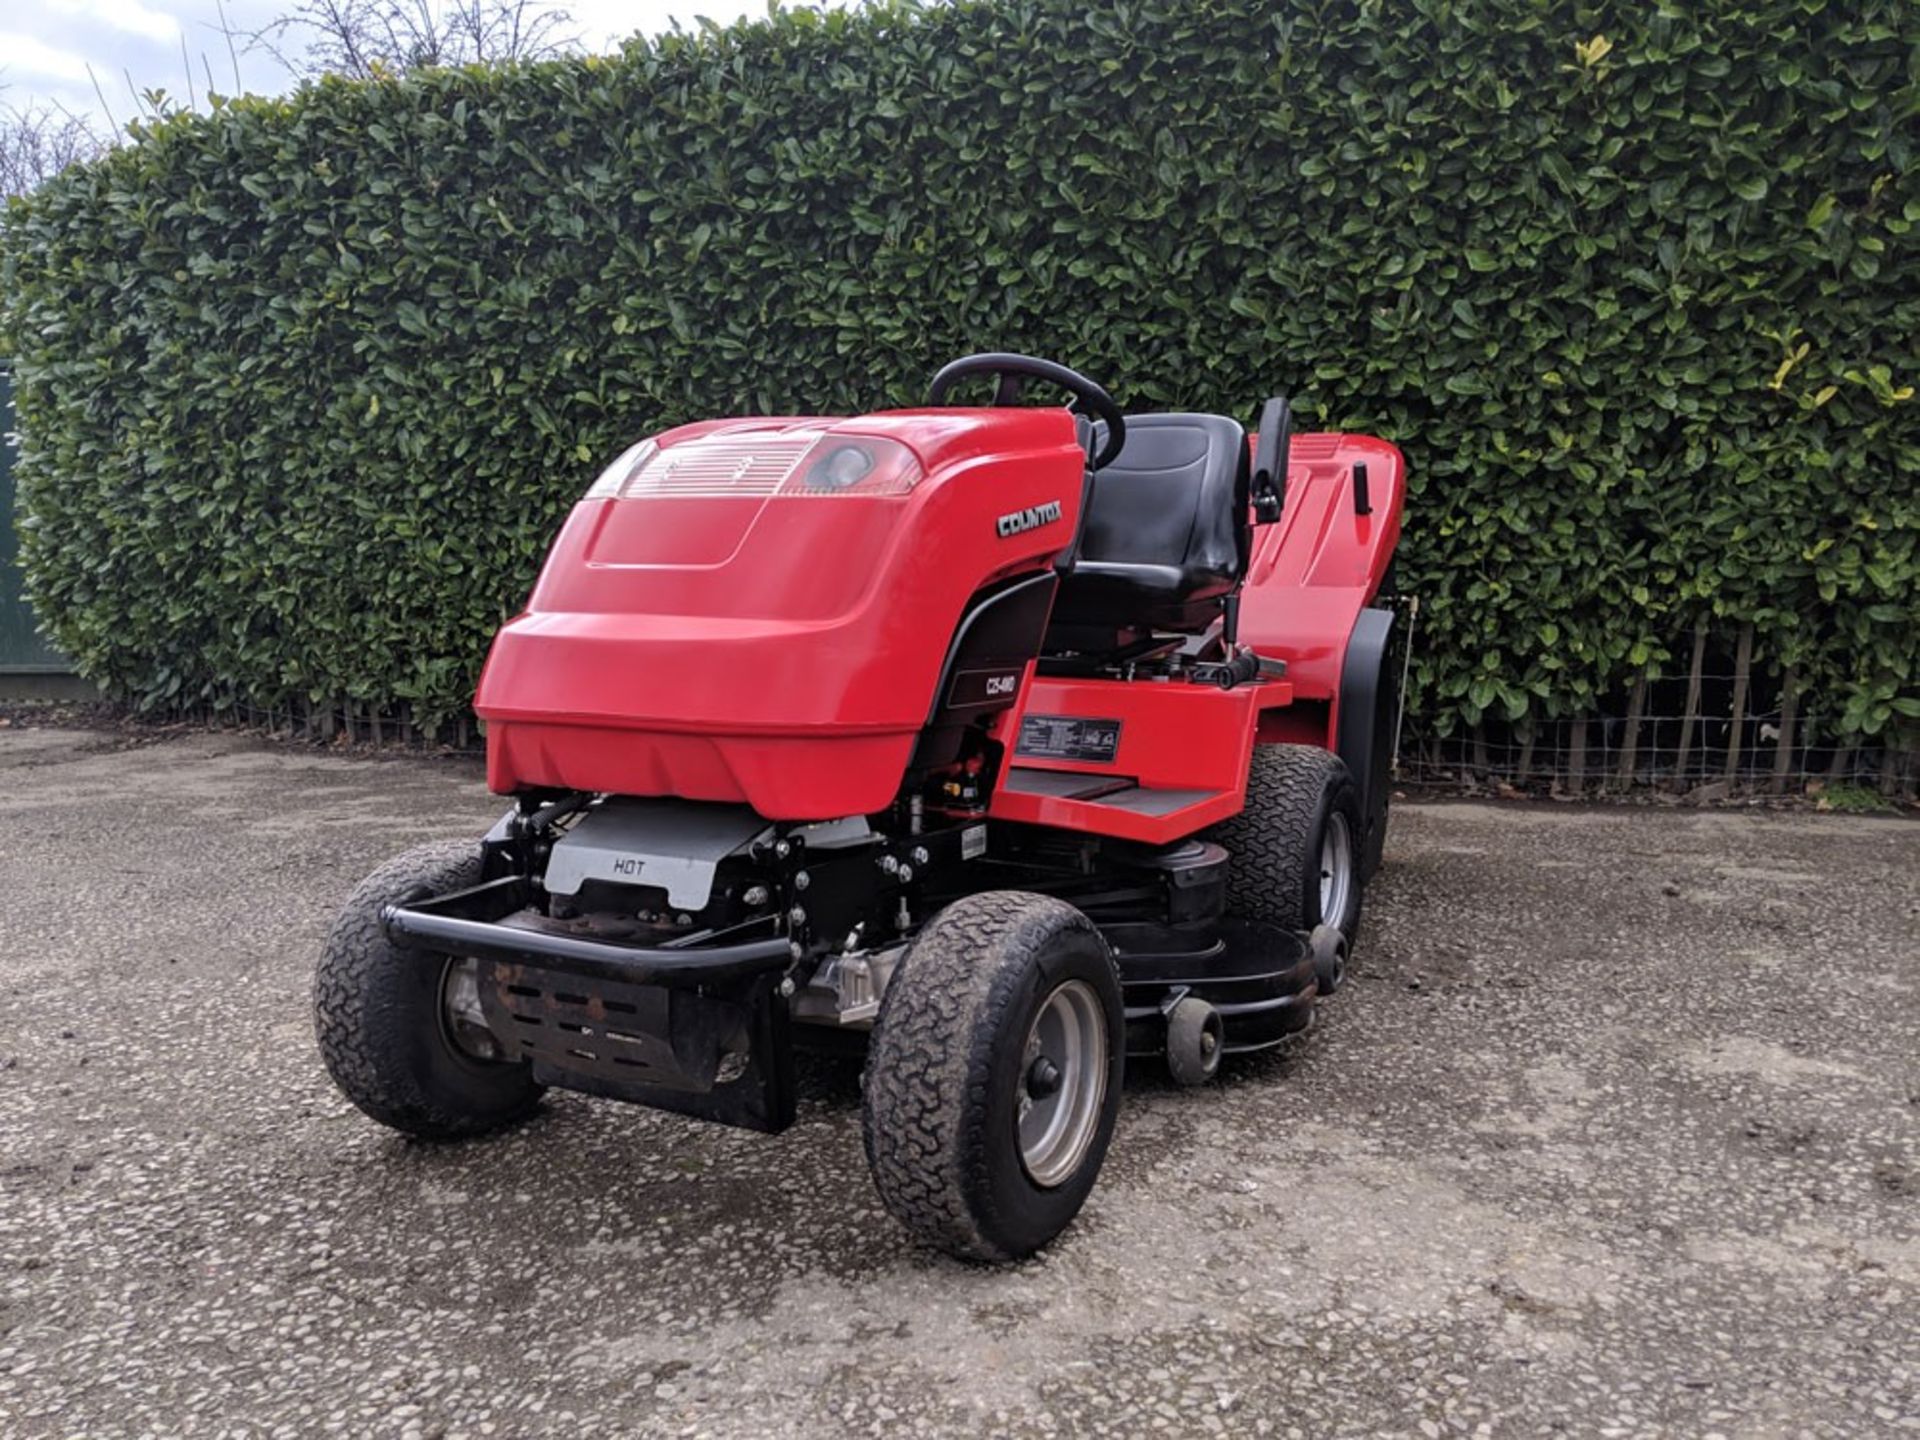 2013 Countax C25-4WD 44" Rear Discharge Garden Tractor With PGC - Image 4 of 7